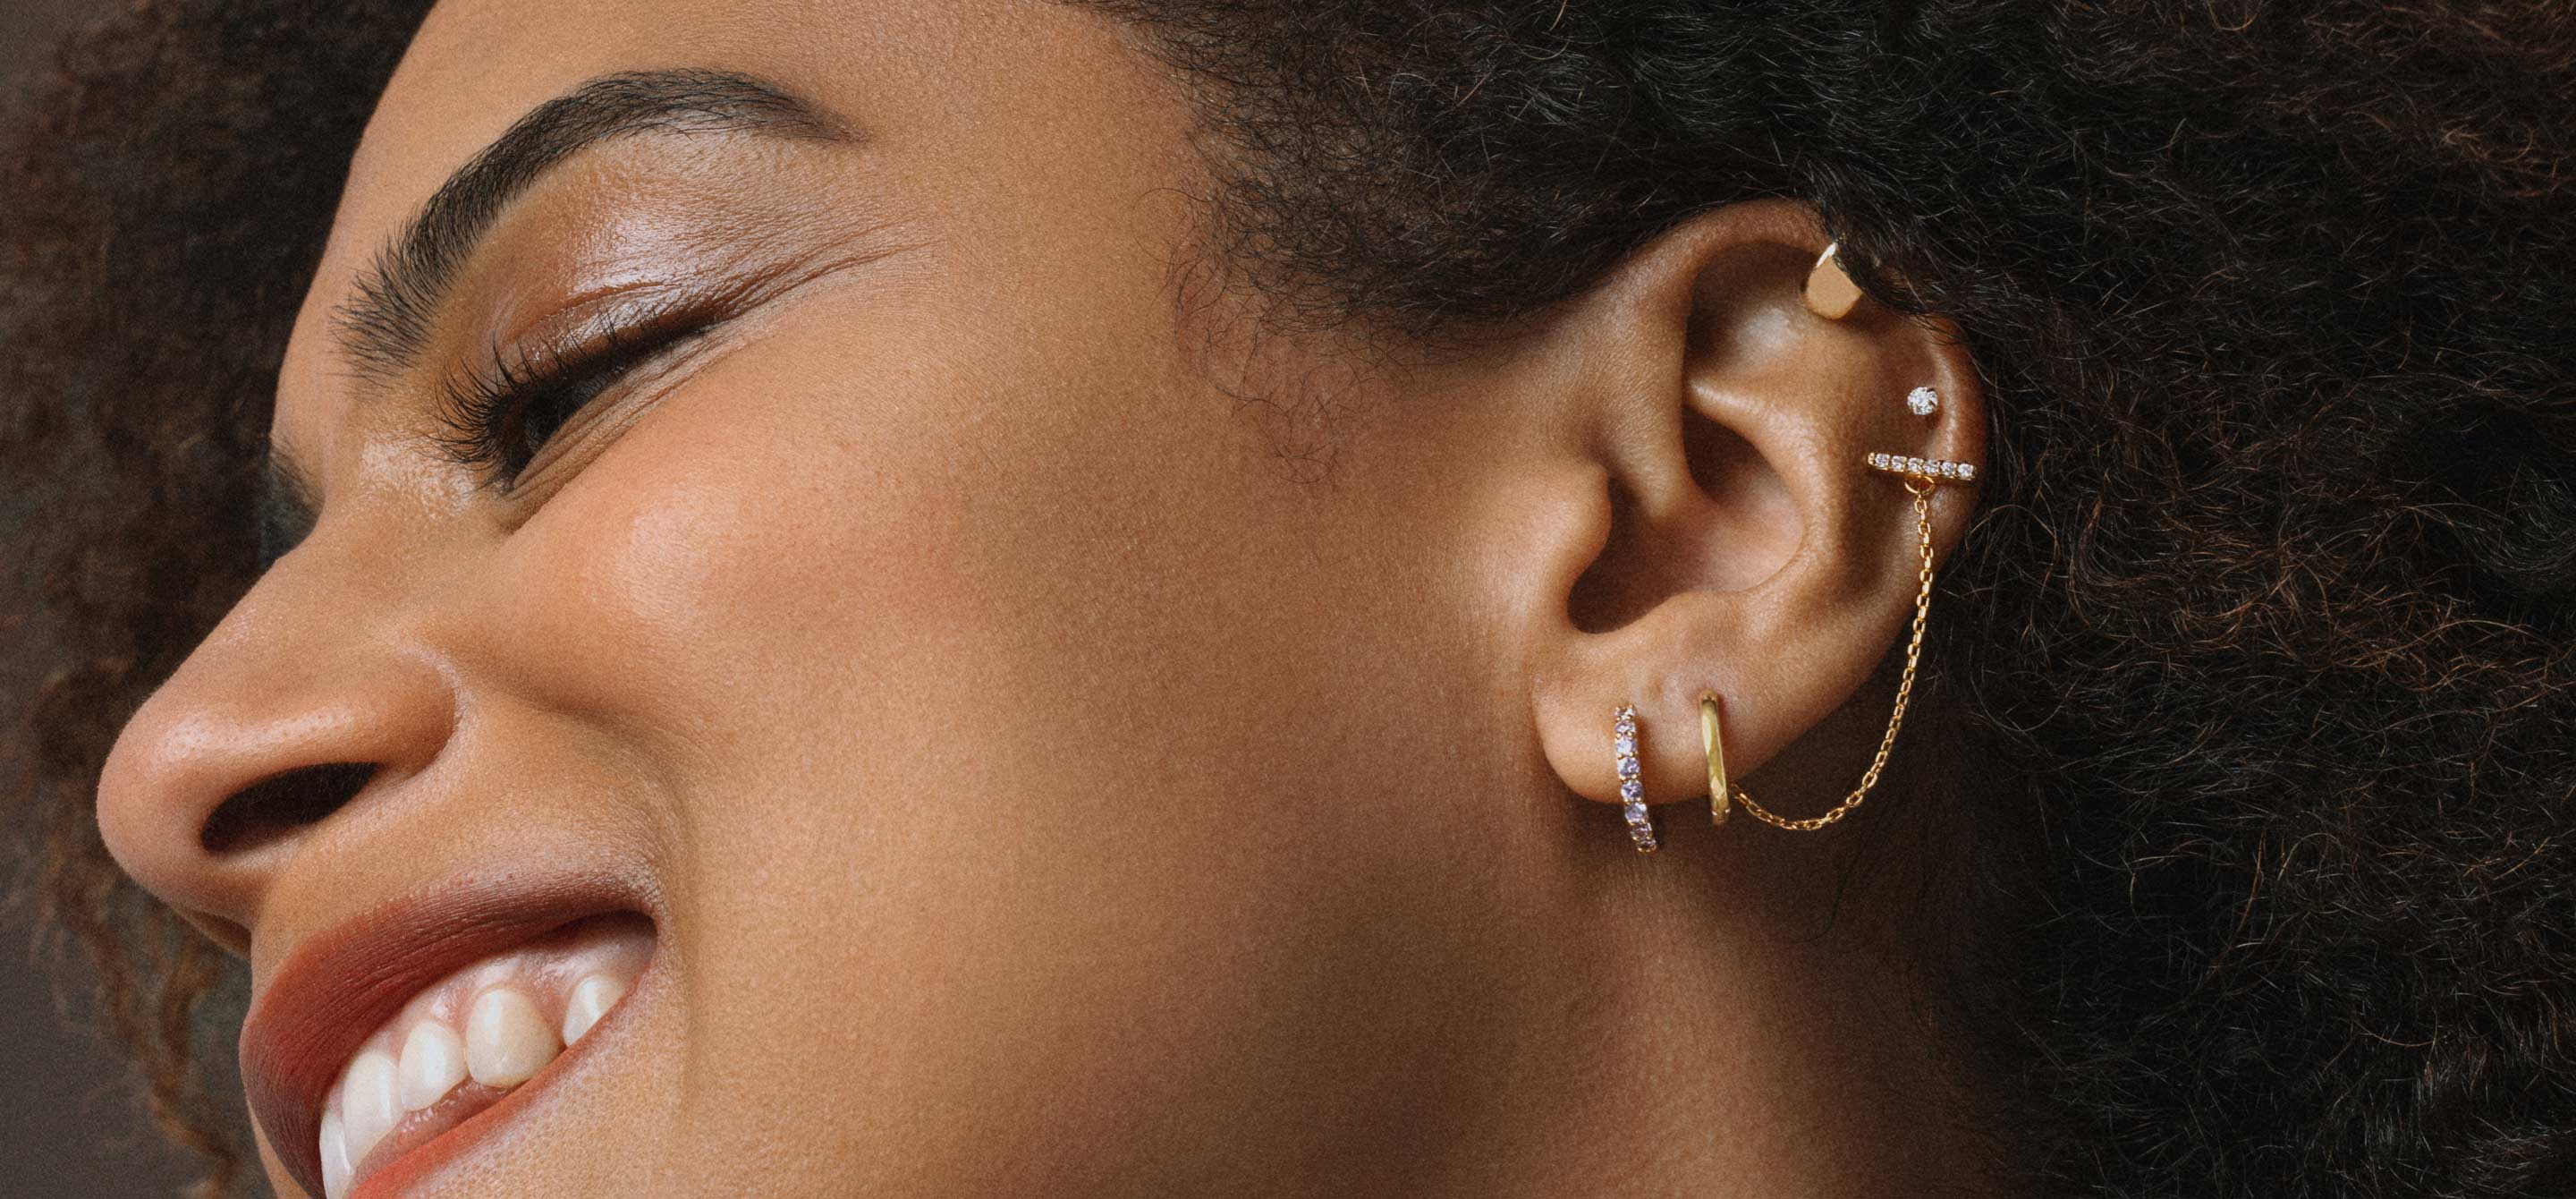 Yes Heavy Earrings Can Permanently Stretch Out Your Earlobes  SELF